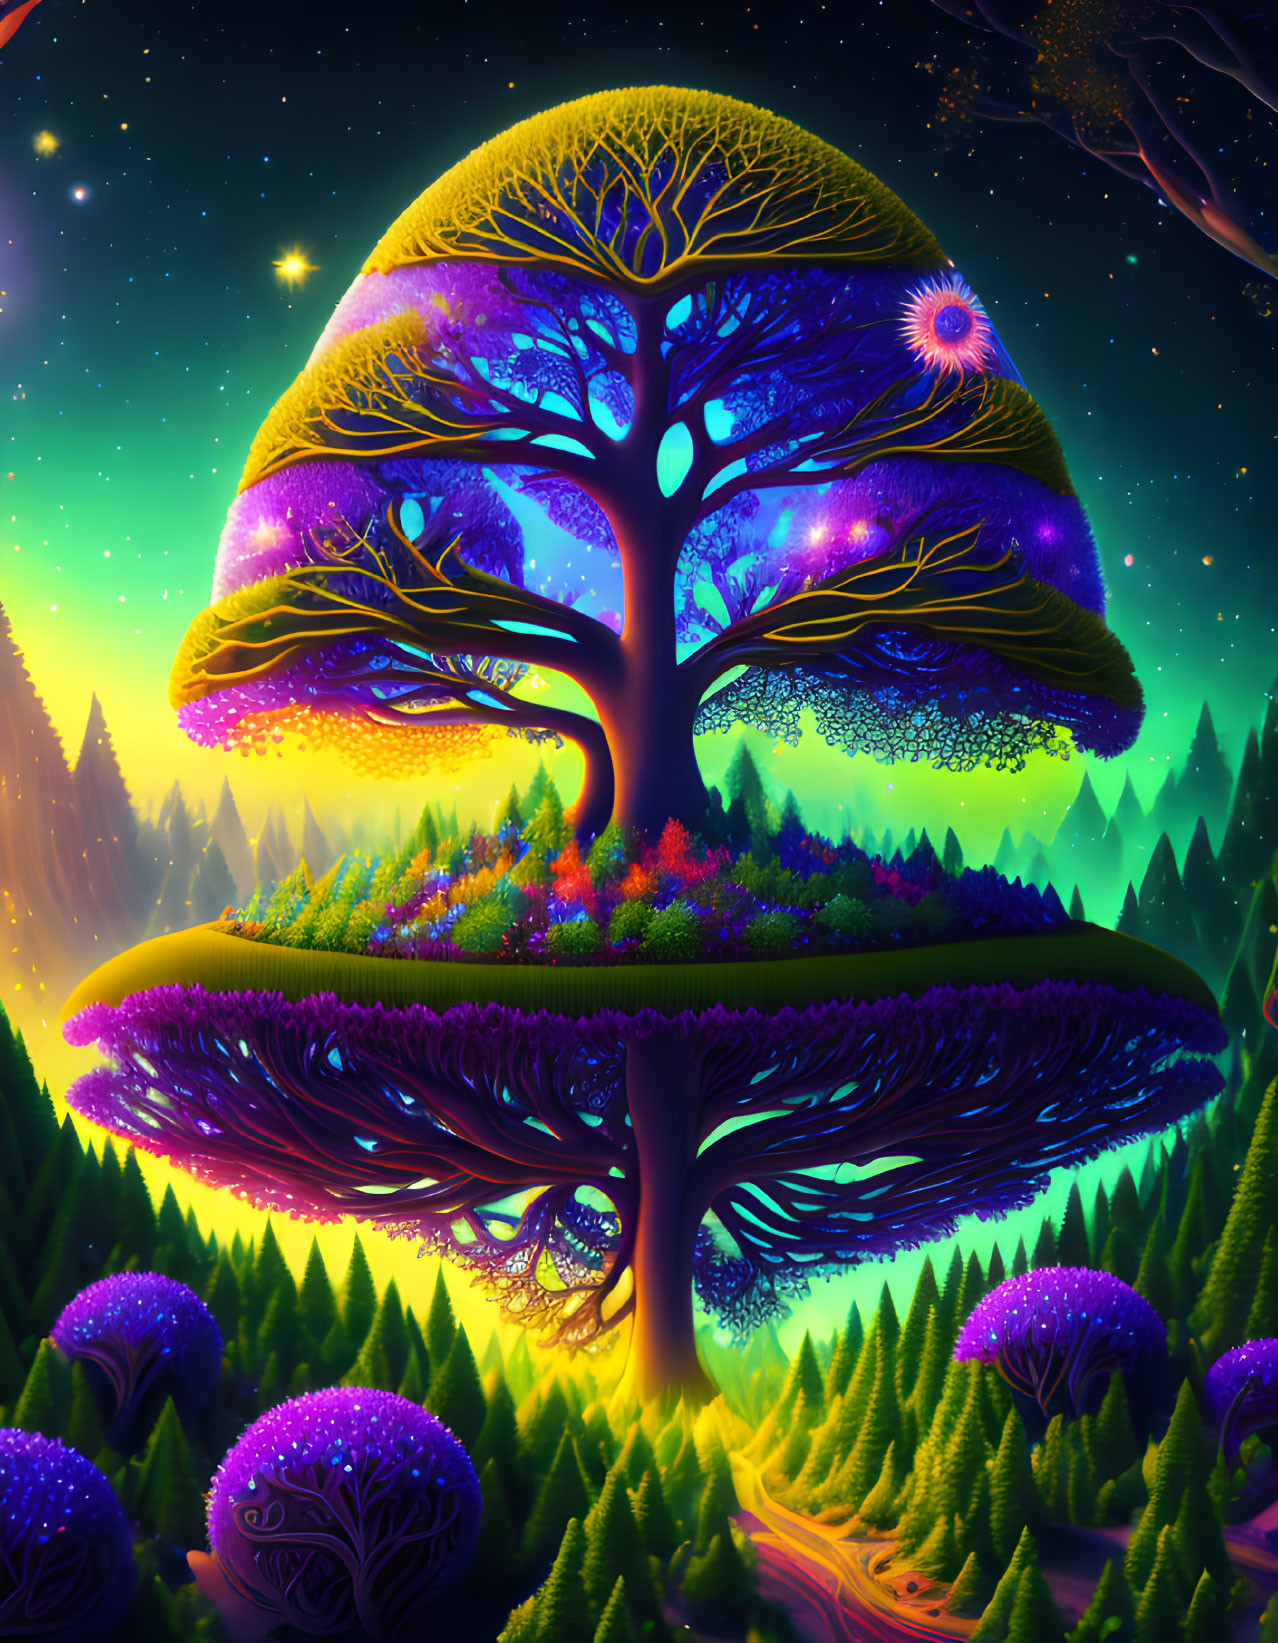 Fantastical oversized mushroom with tree in neon-lit forest